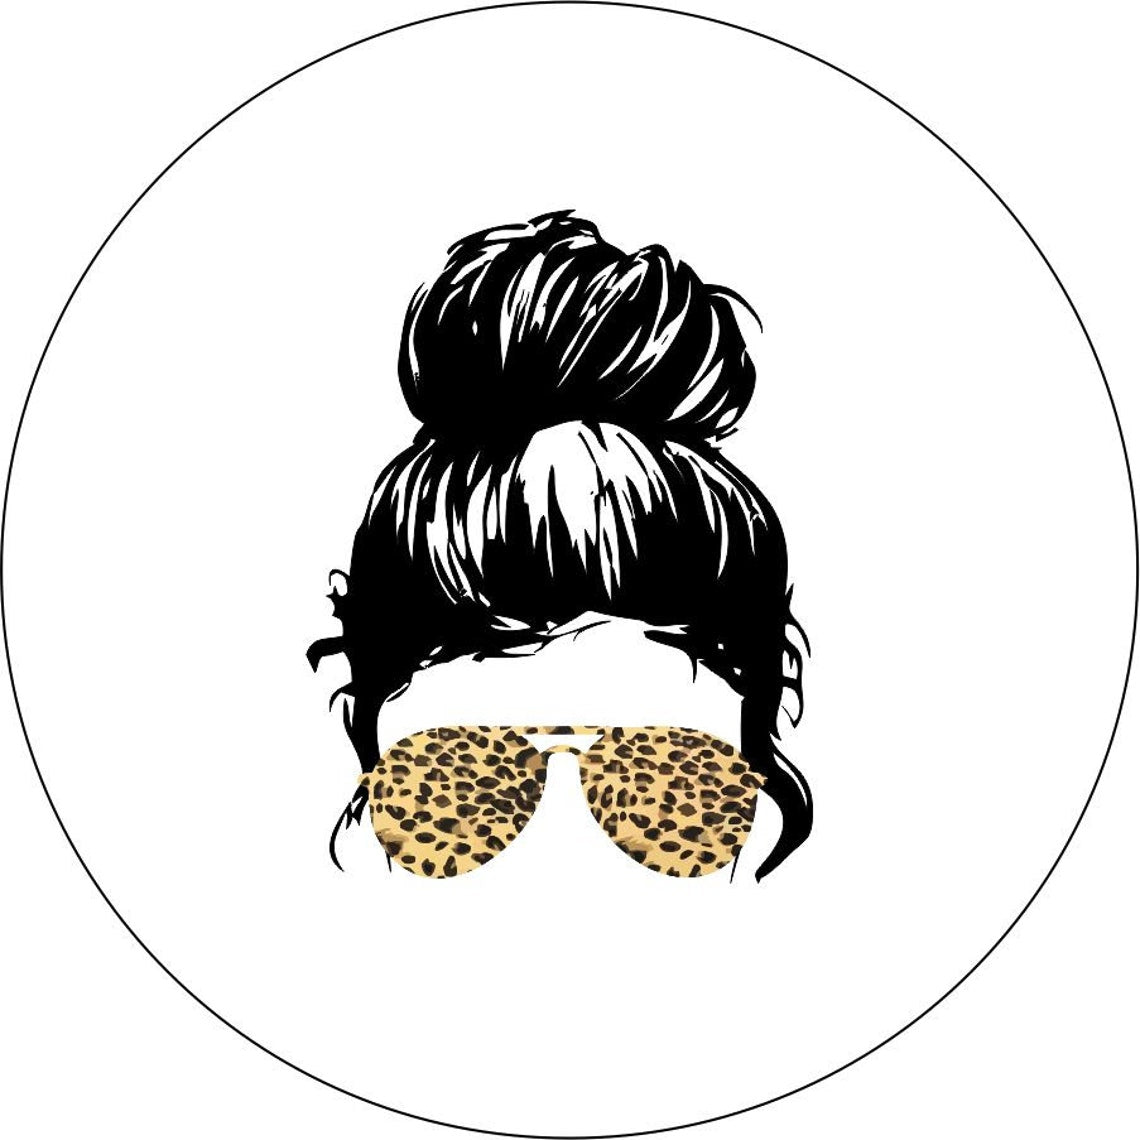 Top knot messy bun girl wearing cheetah leopard print sunglasses spare tire cover for Jeep, Bronco, RV, camper, and more. Spare tire cover design made for white vinyl 